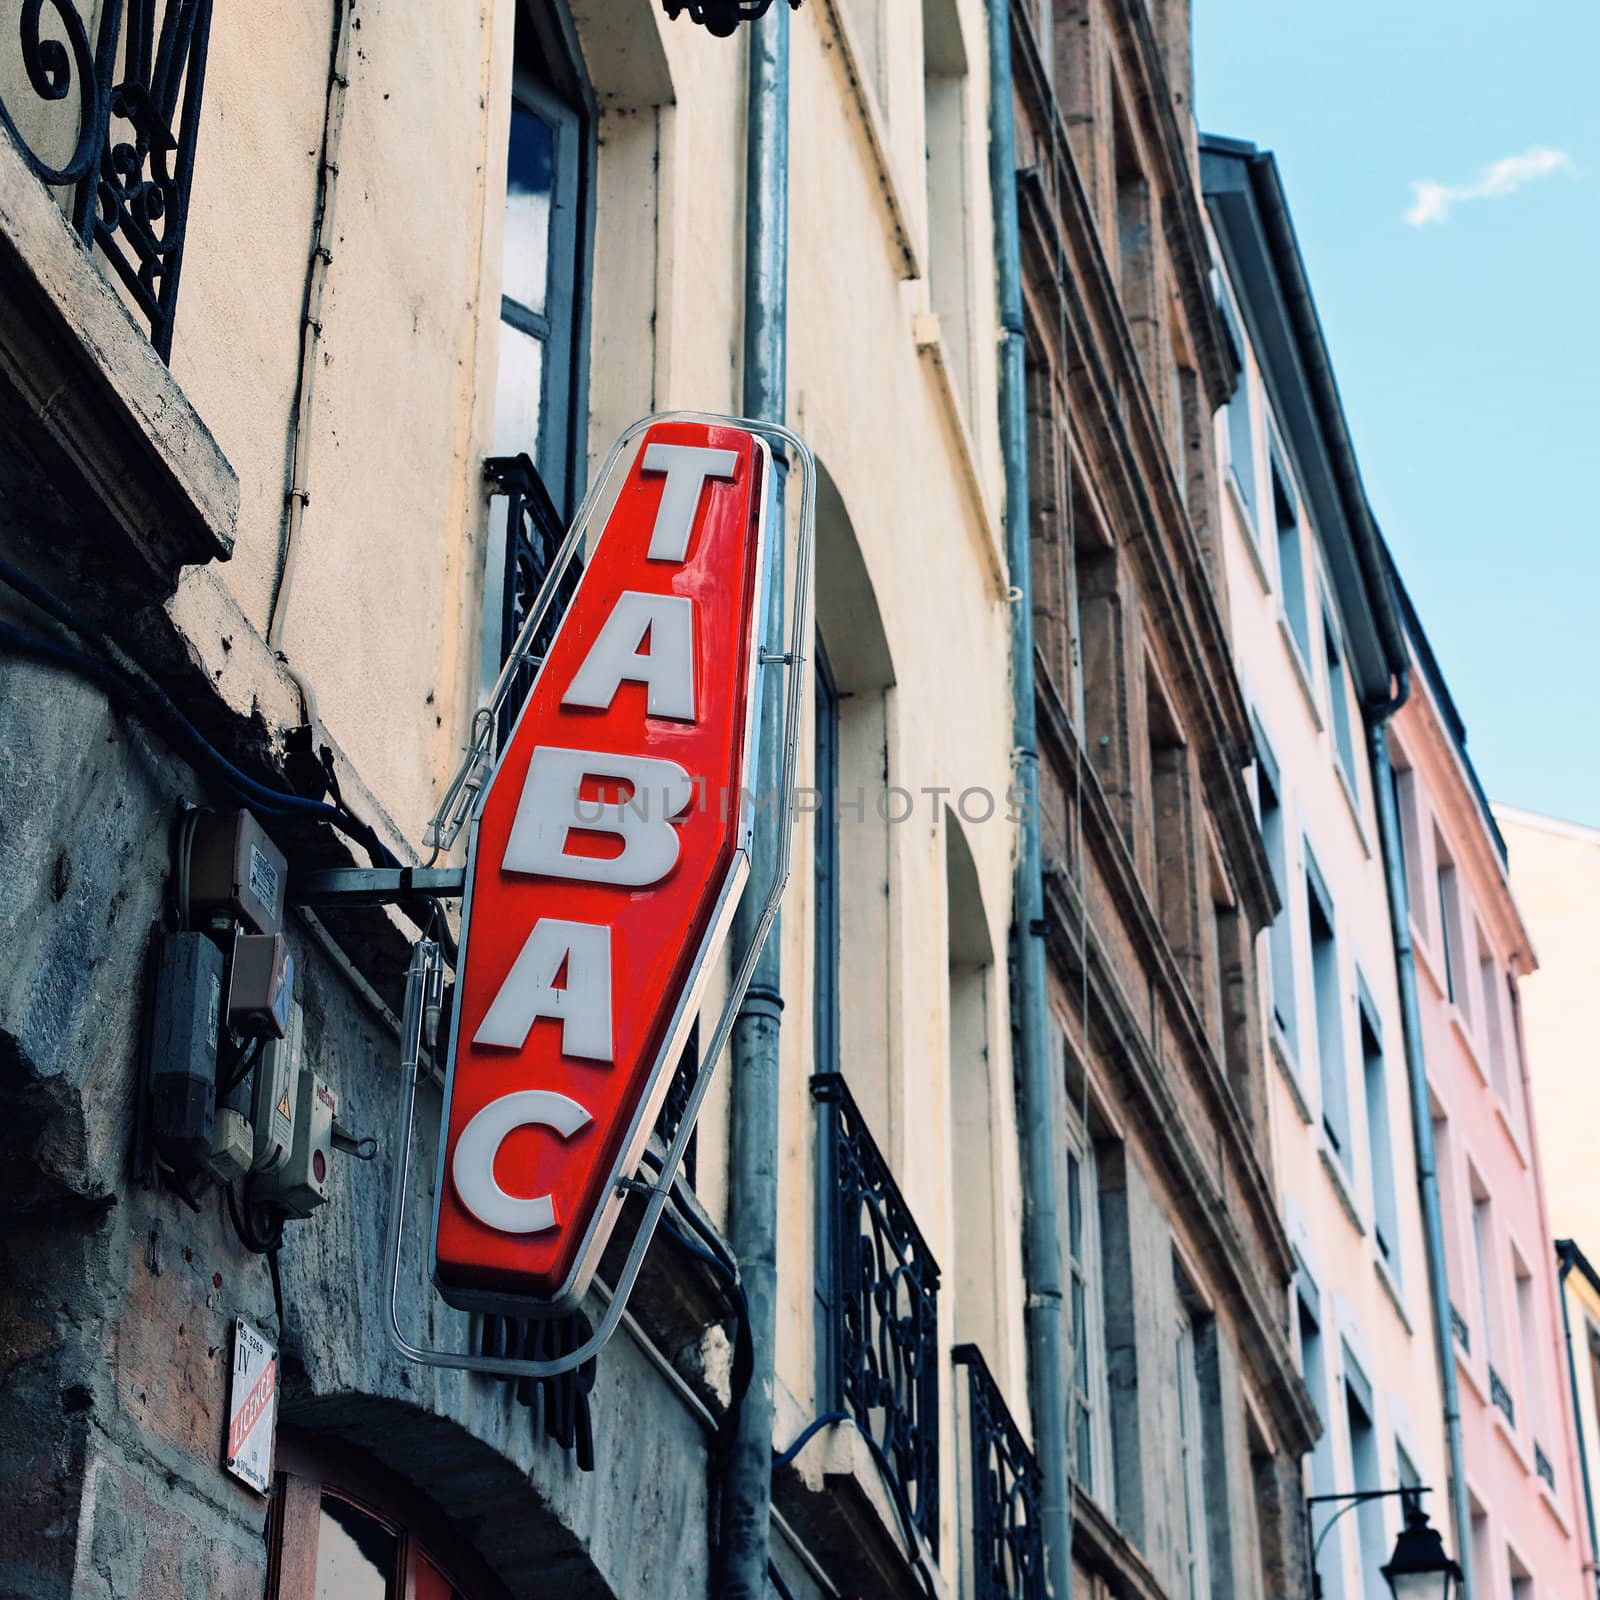 French Tabac Sign in a small street